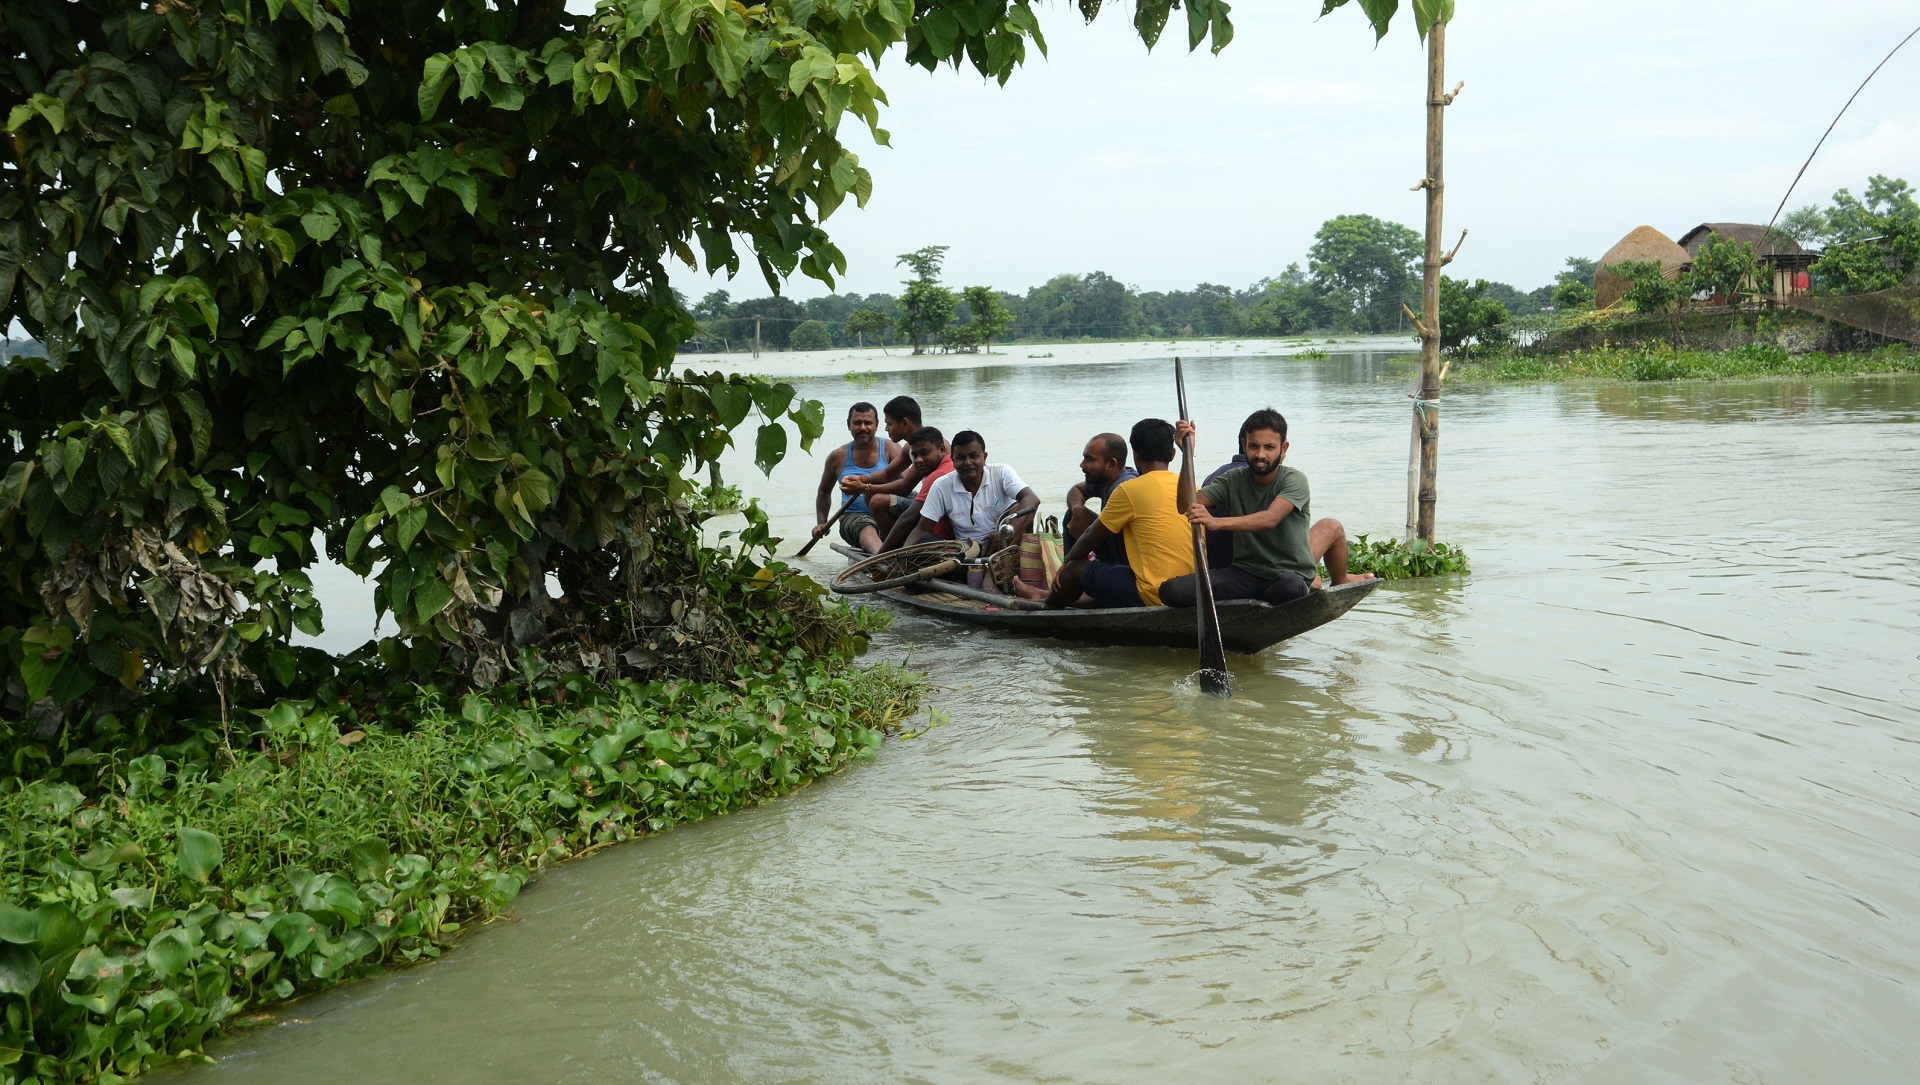 epa08551703 Villagers use a boat to cross a flooded area in Morigaon district of Assam, India, 17 July 2020. According to news reports, Assam state continues to battle with flood situation which has left over three million people affected by it and at least sixty dead.  EPA/STR